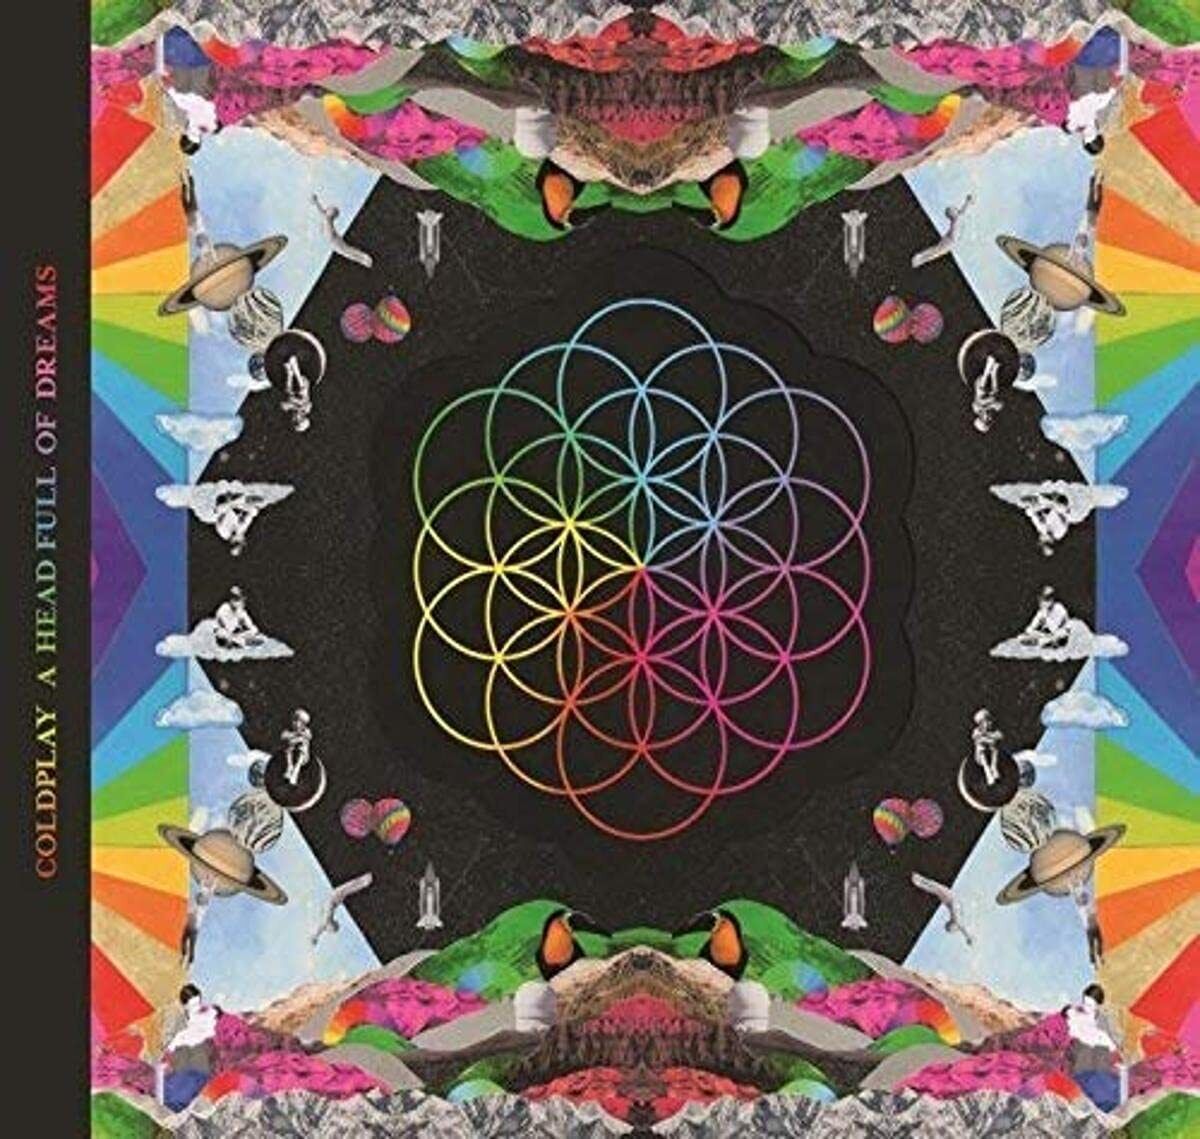 TOUR EDITION COLDPLAY A HEAD FULL OF DREAMS 2CD with